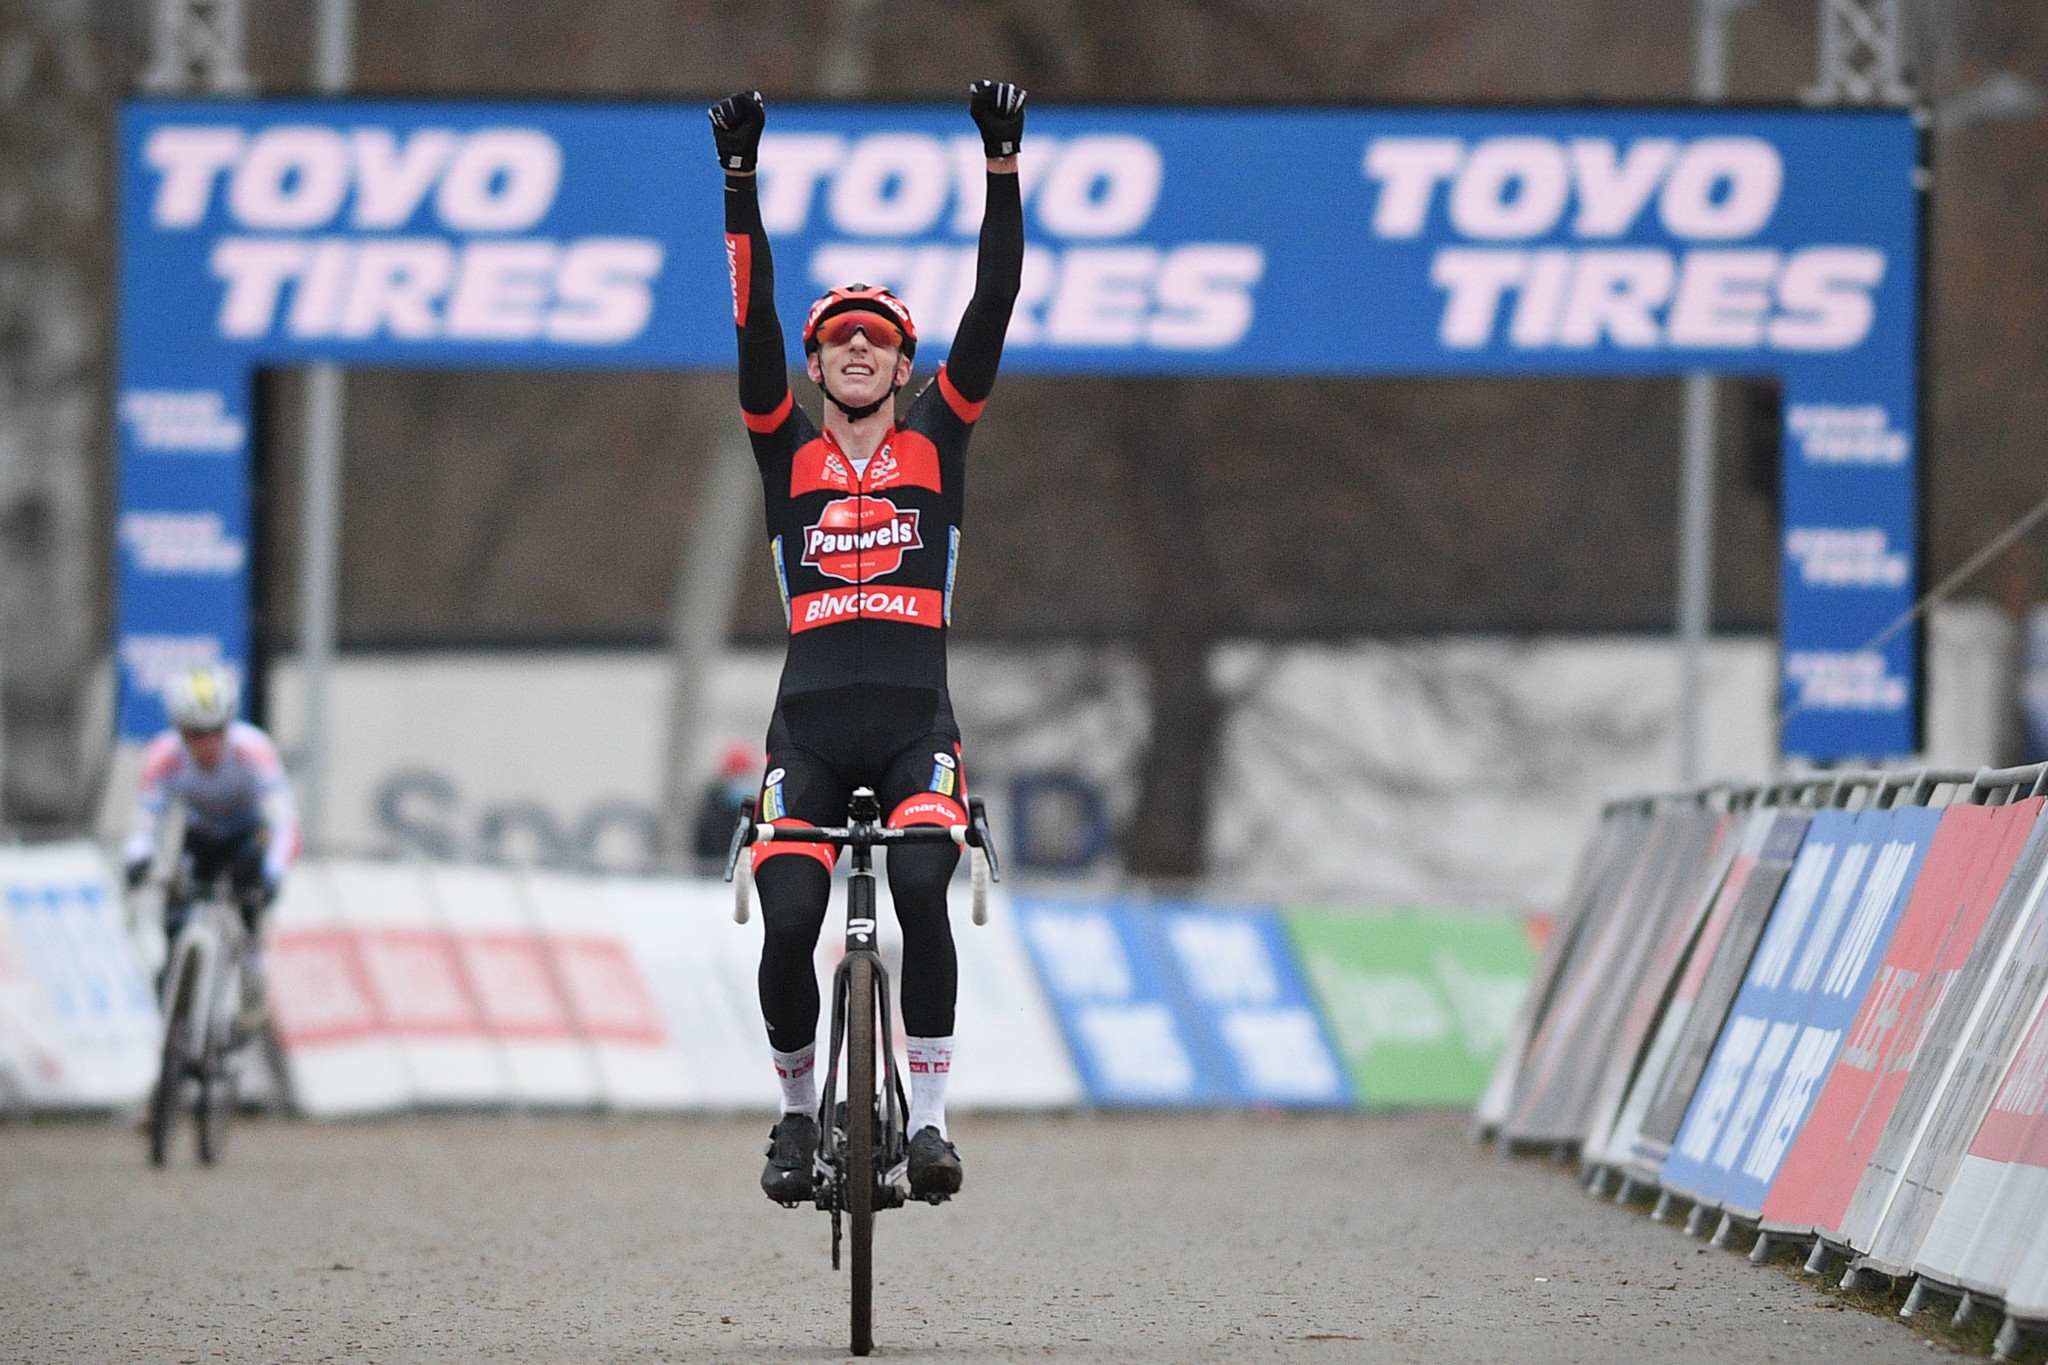 Belgium and The Netherlands record elite race medal sweeps at first Cyclo-Cross World Cup